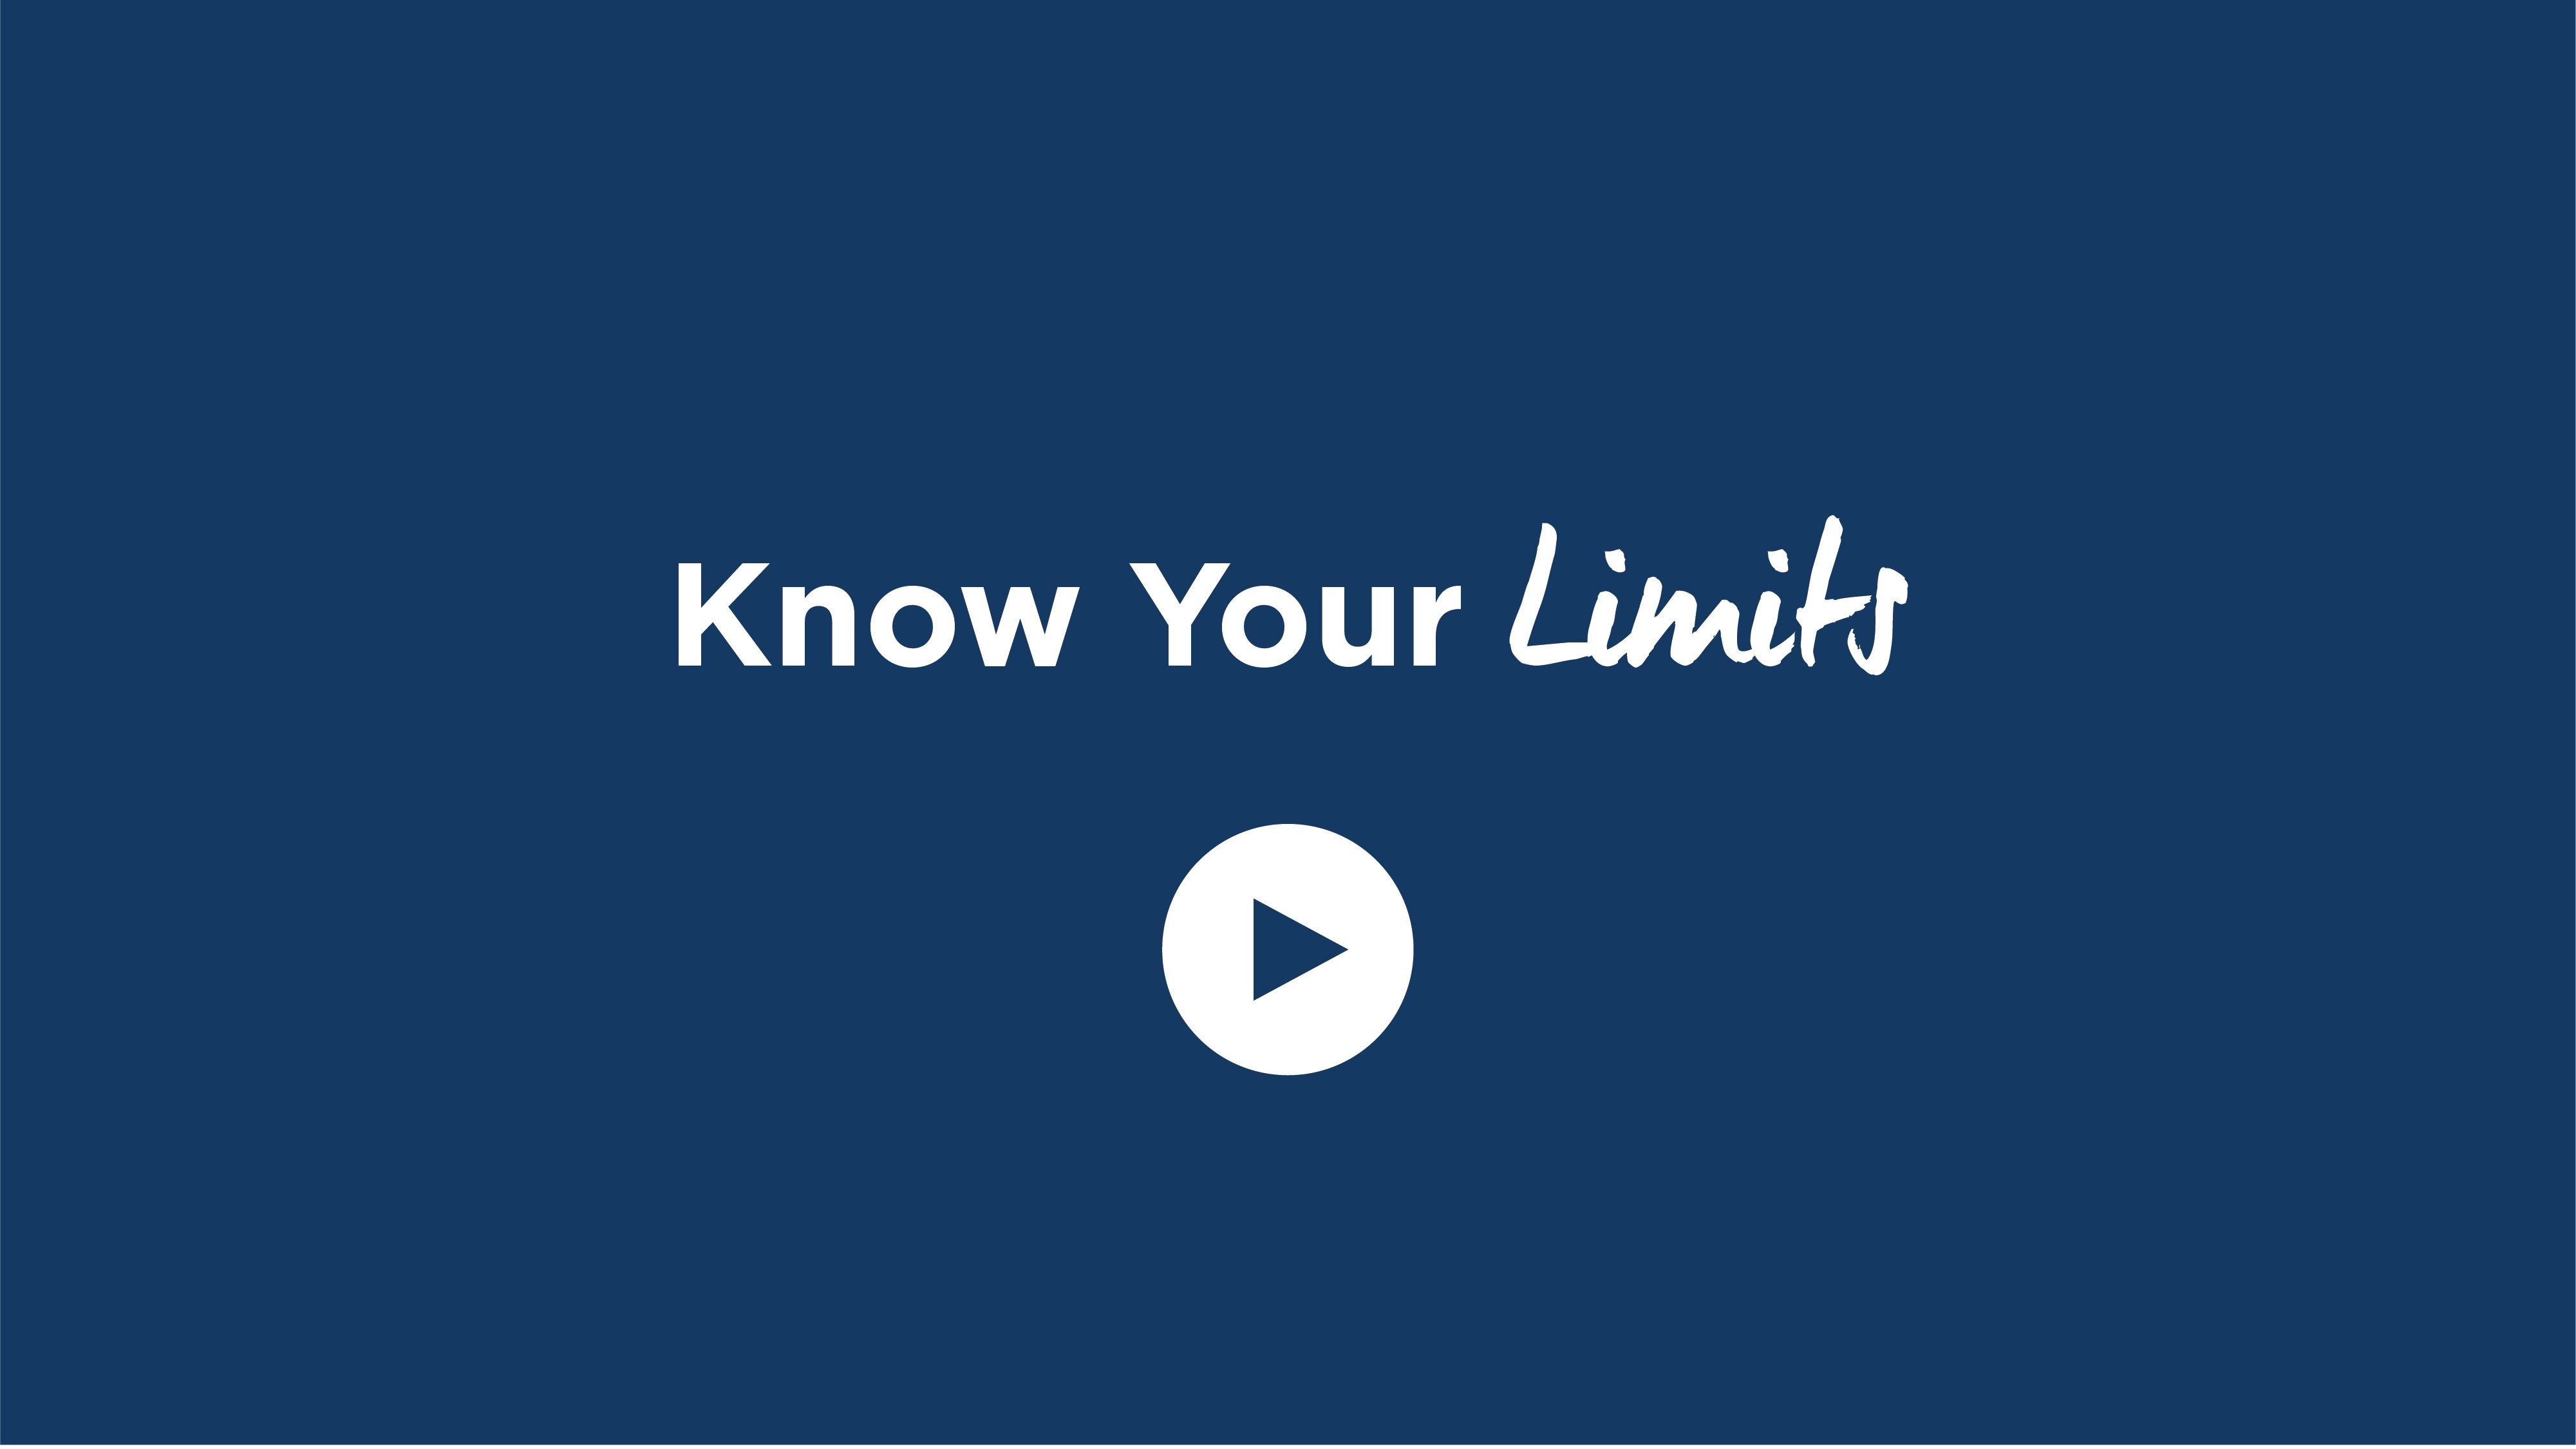 Know Your Limits - Click to Watch Video